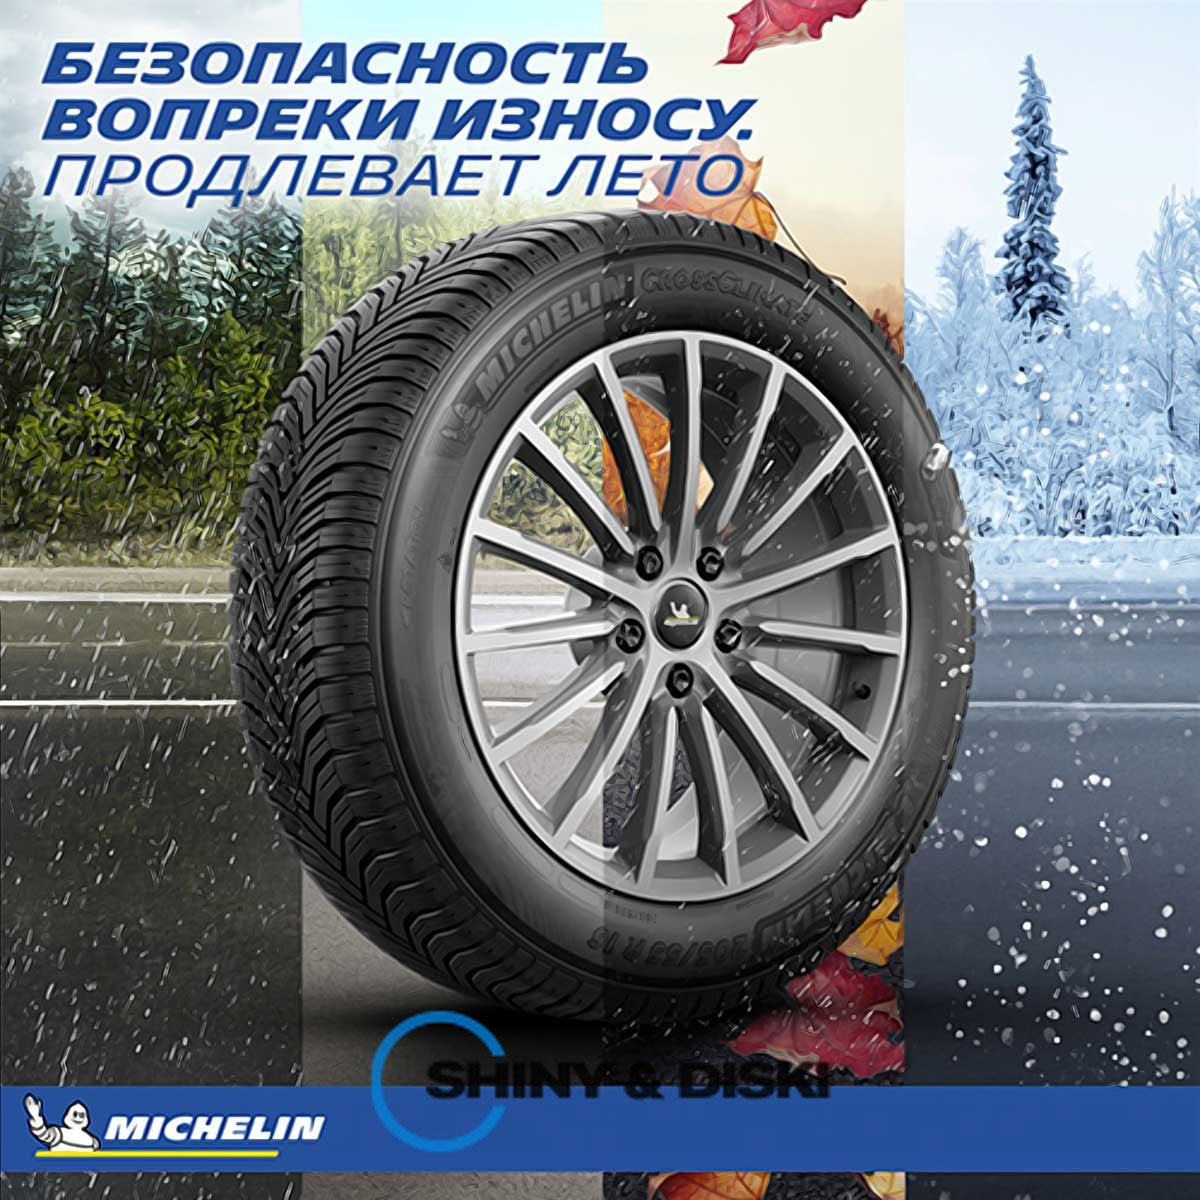 покрышки michelin cross climate+ 185/65 r14 86t